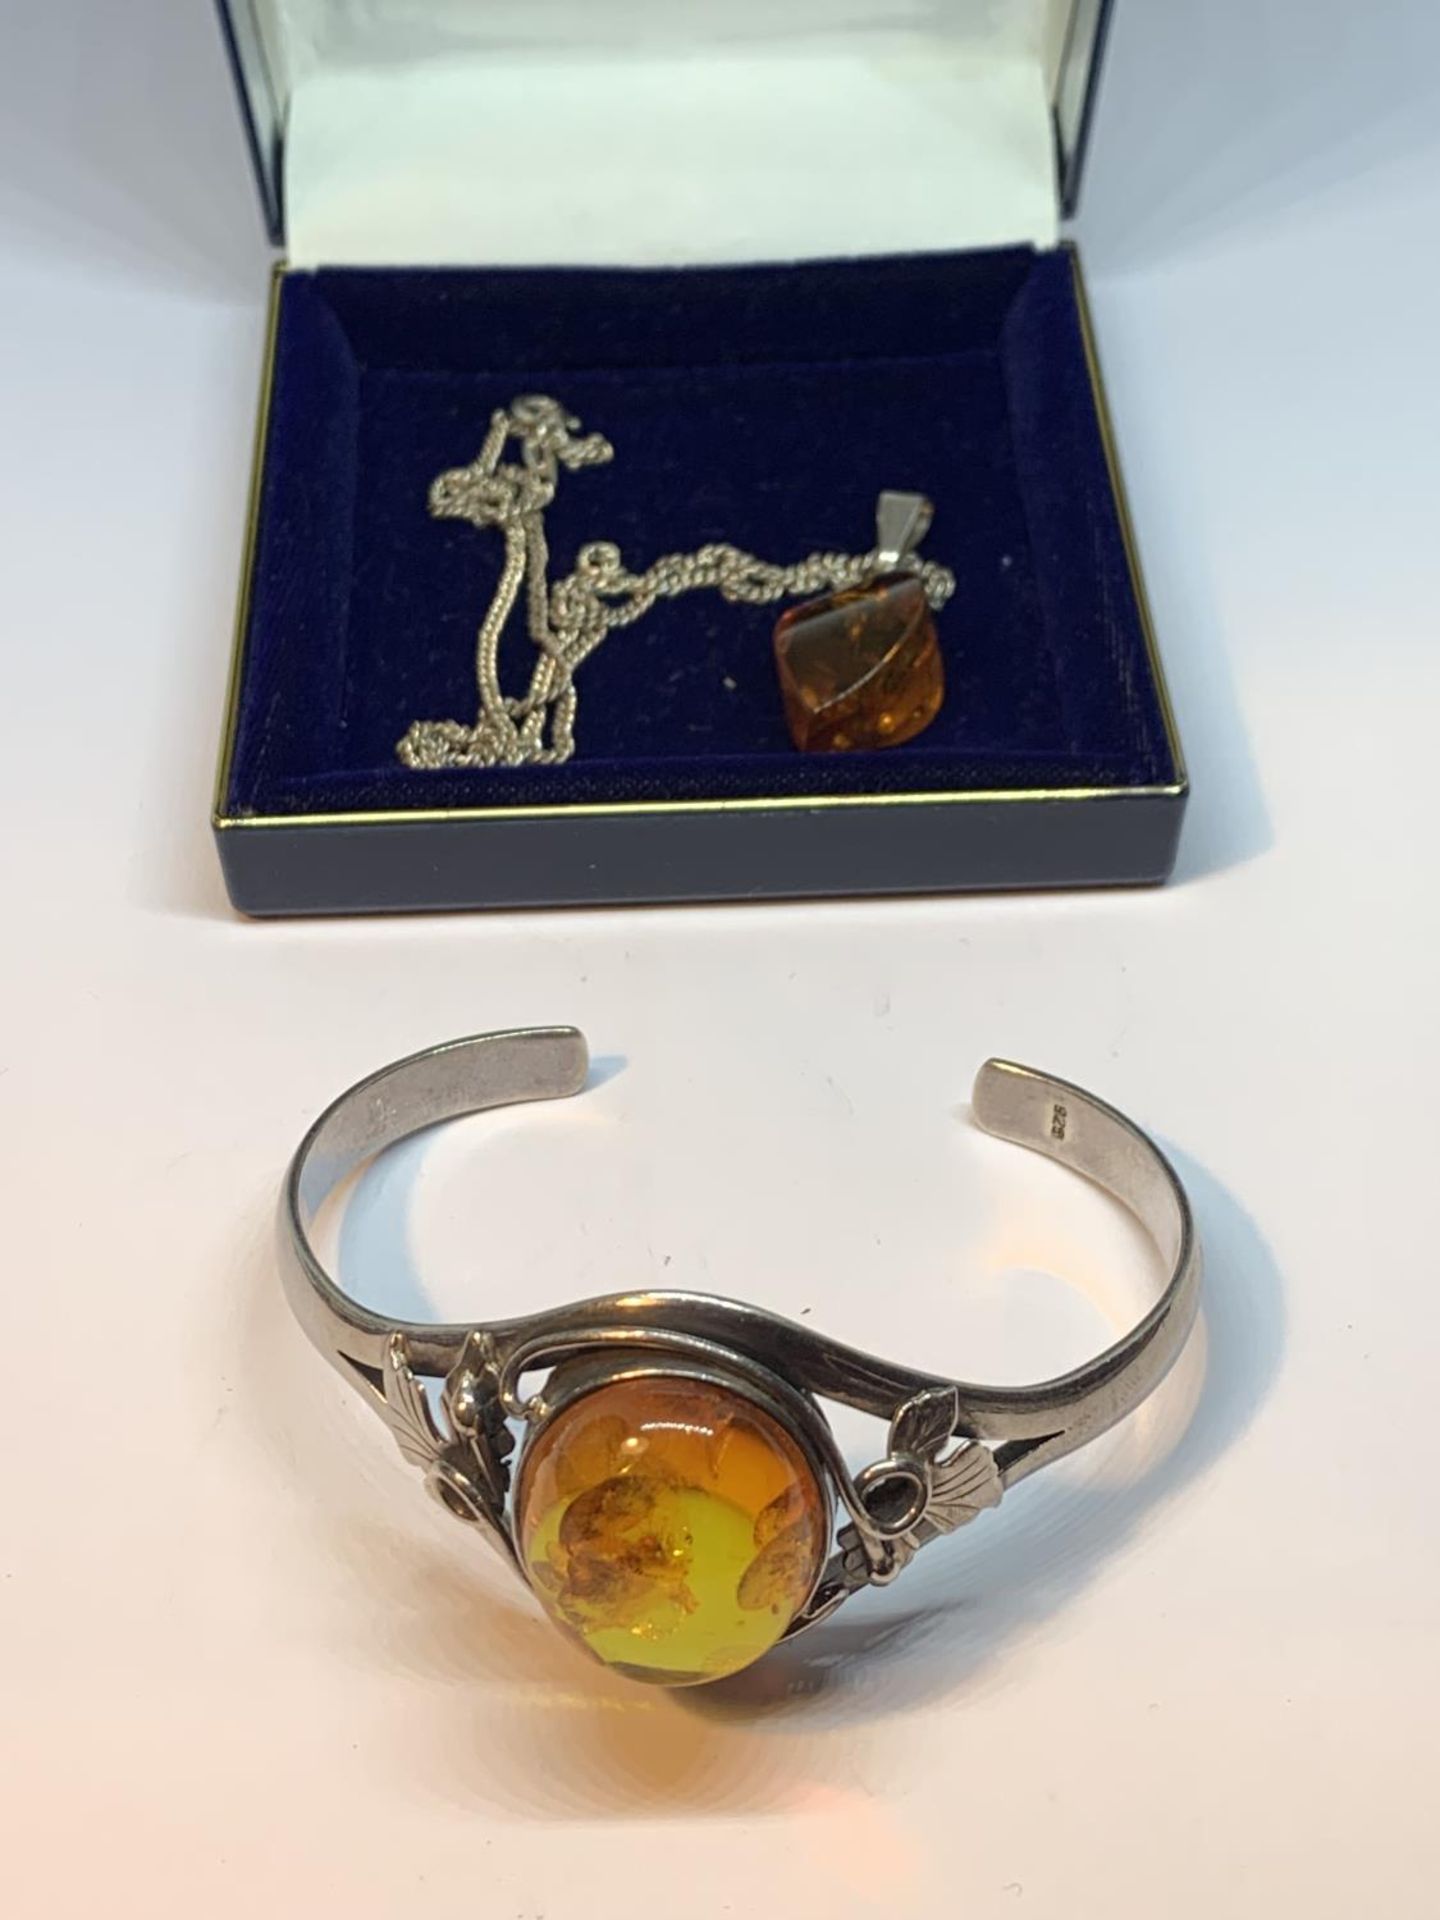 A DECORATIVE SILVER BANGLE WITH A LARGE CENTRAL AMBER STONE AND AN AMBER DROP ON A SILVER CHAIN IN A